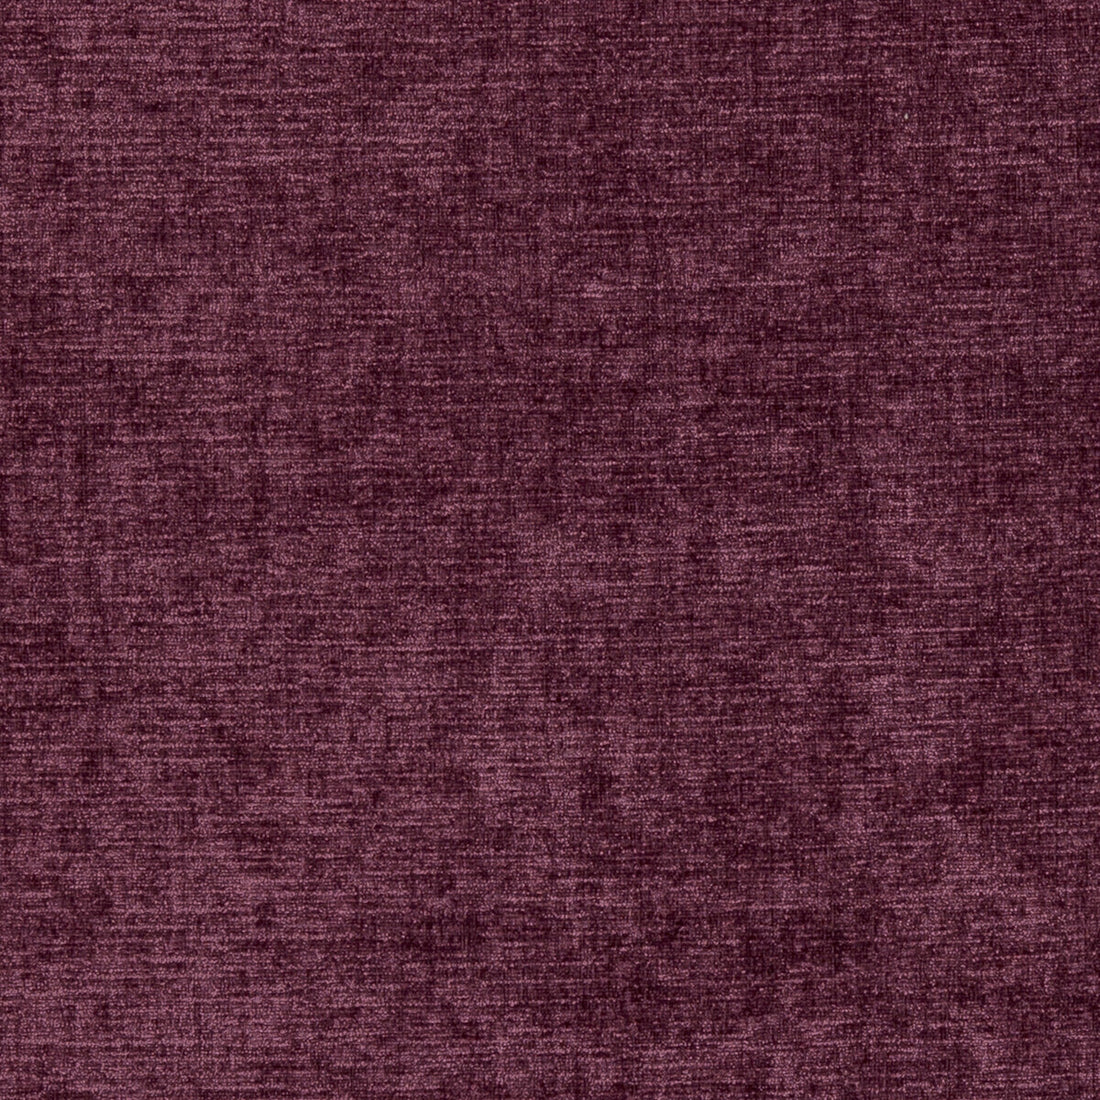 Karina fabric in damson color - pattern F0371/12.CAC.0 - by Clarke And Clarke in the Clarke &amp; Clarke Karina collection